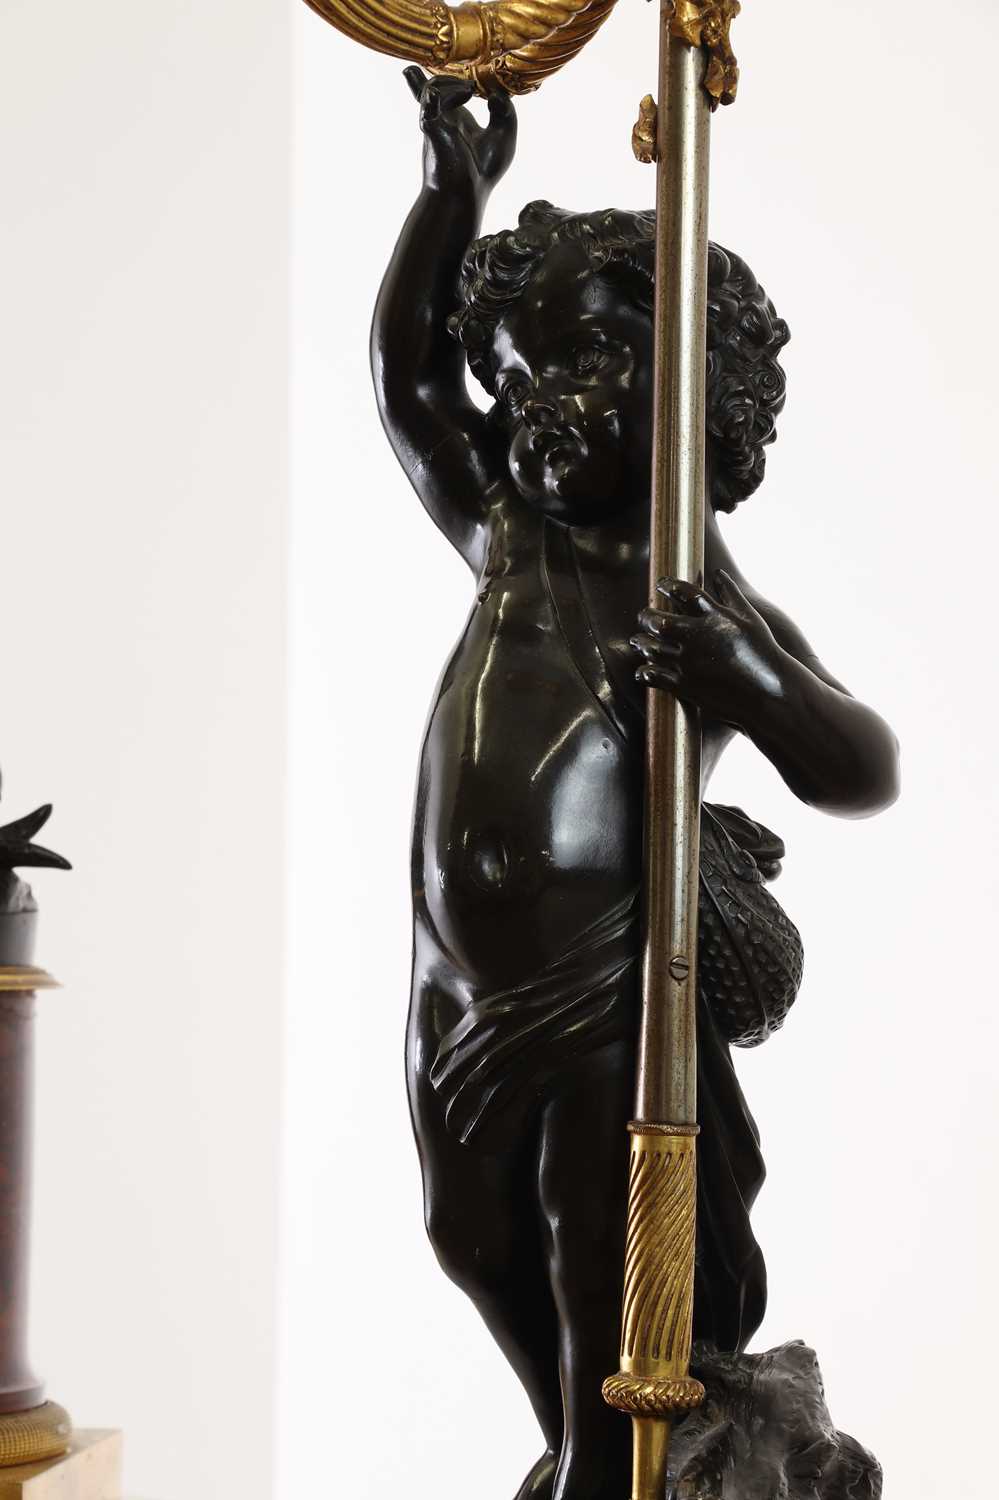 A pair of French Empire bronze and marble candelabra attributed to François Rémond (c.1747-1812), - Image 6 of 23